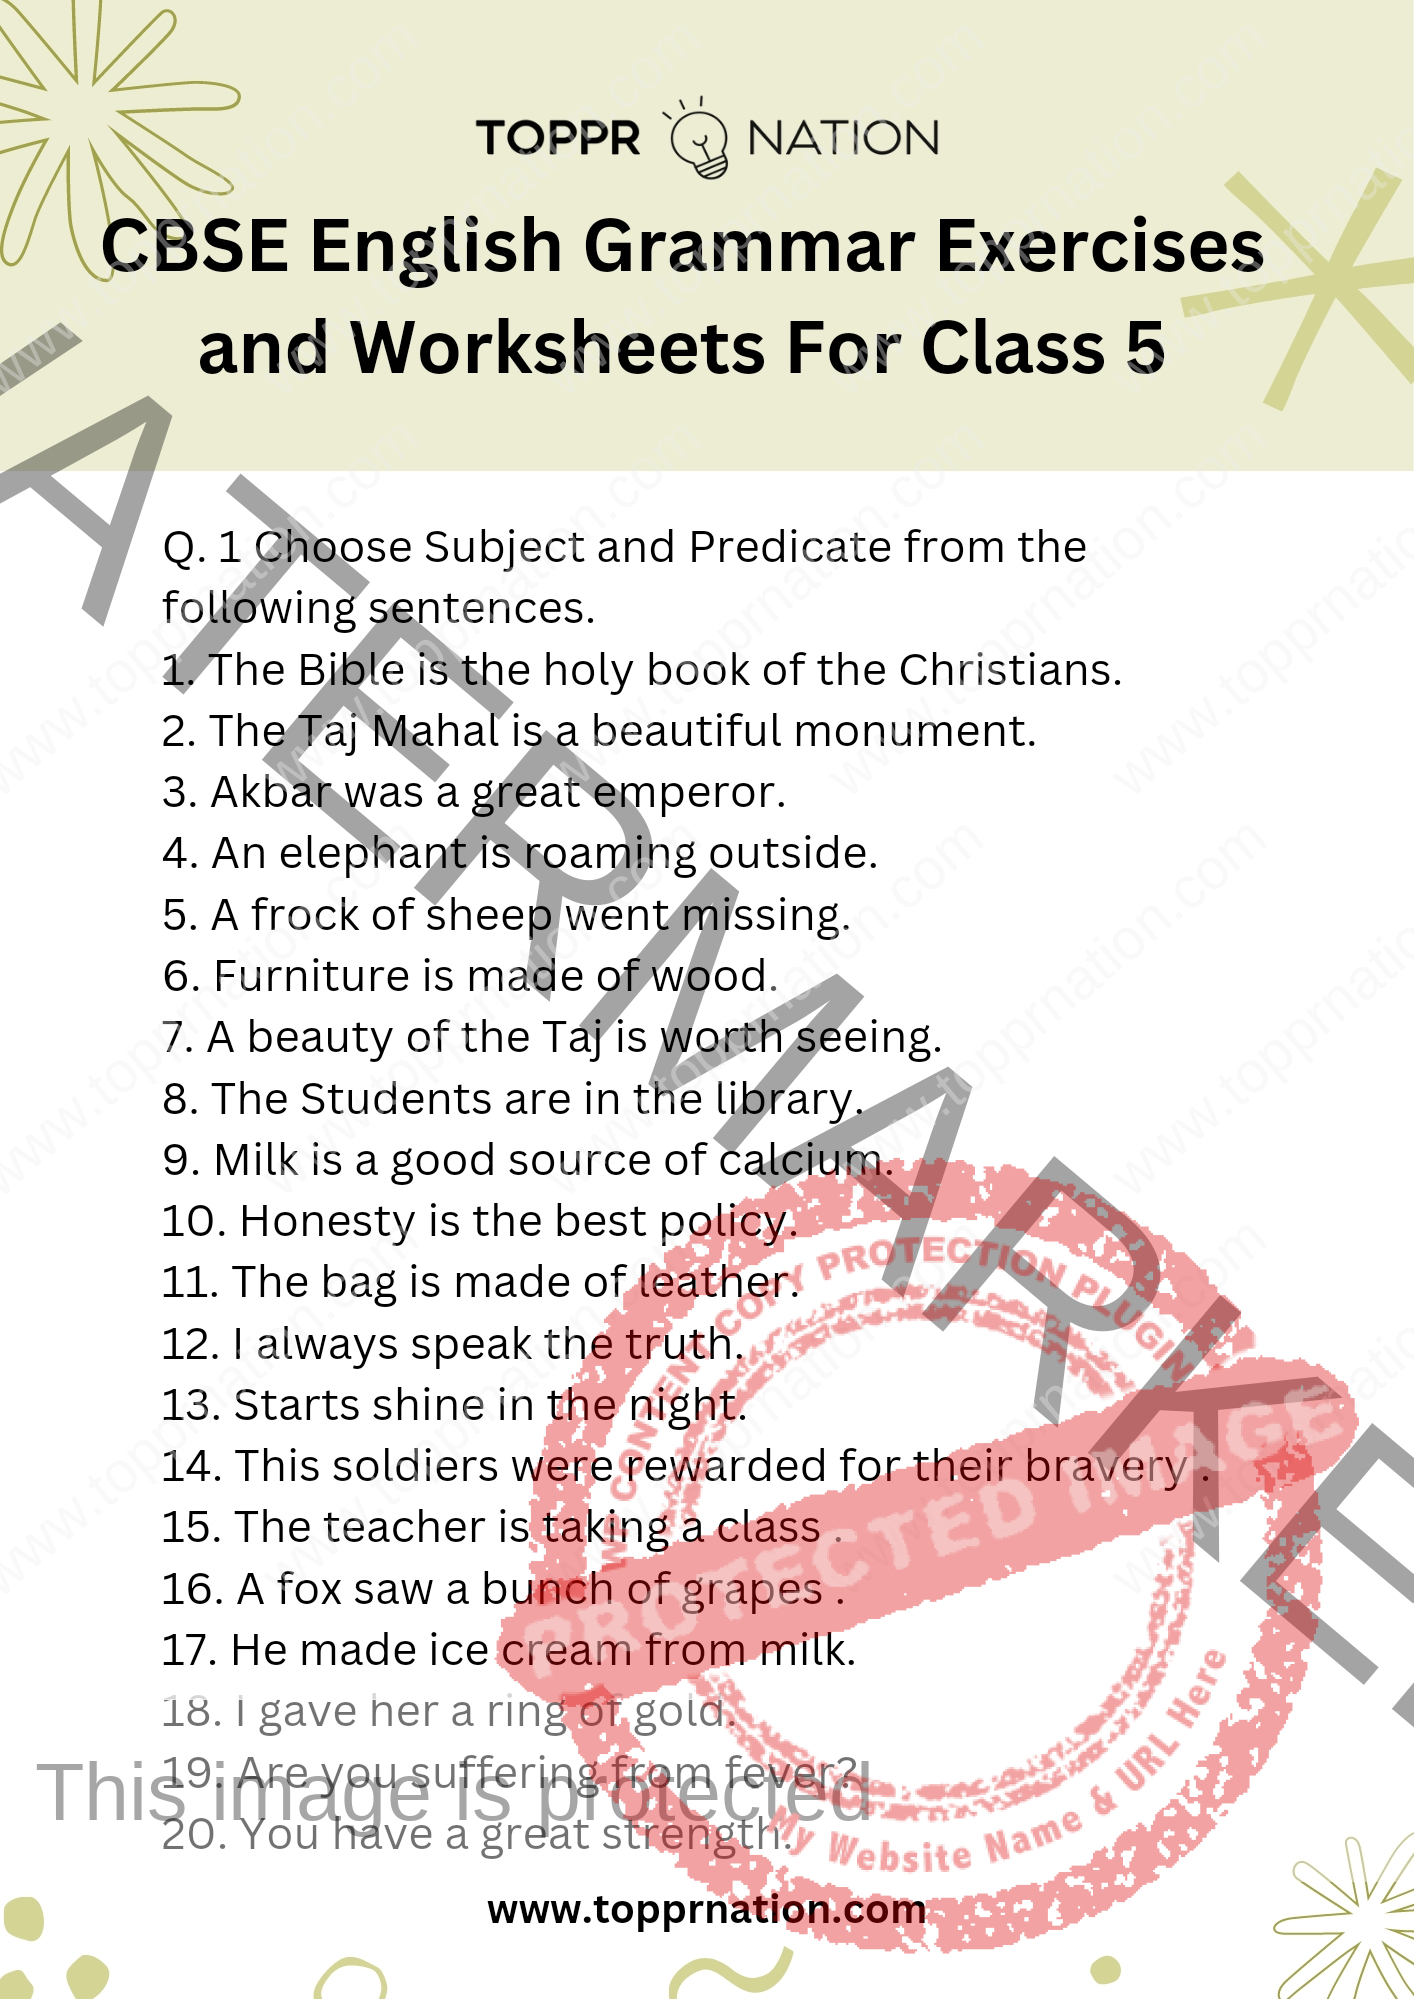 CBSE English Grammar Exercises and Worksheets For Class 5